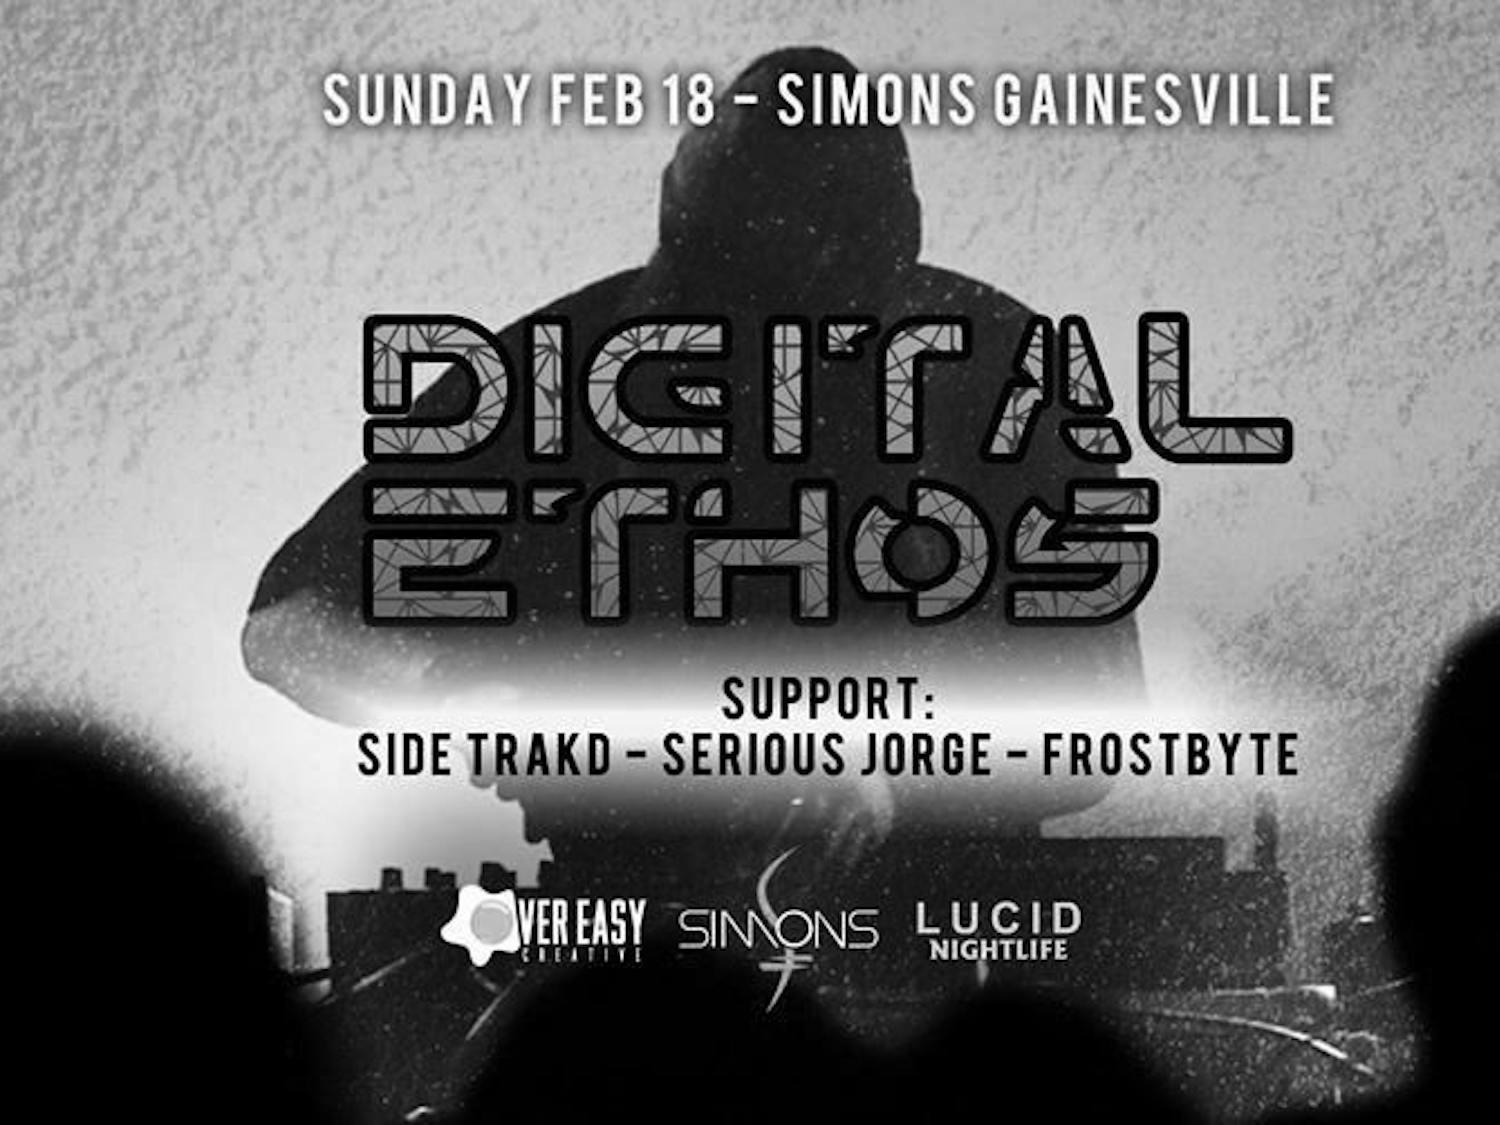 Digital Ethos, a New Jersey-based heavyweight of a producer who’s grown in popularity since collaborating with Bassnectar on wonky dubstep track “Slather,” will bring his talents to Simon’s toward the end of the month with a handful of local support.